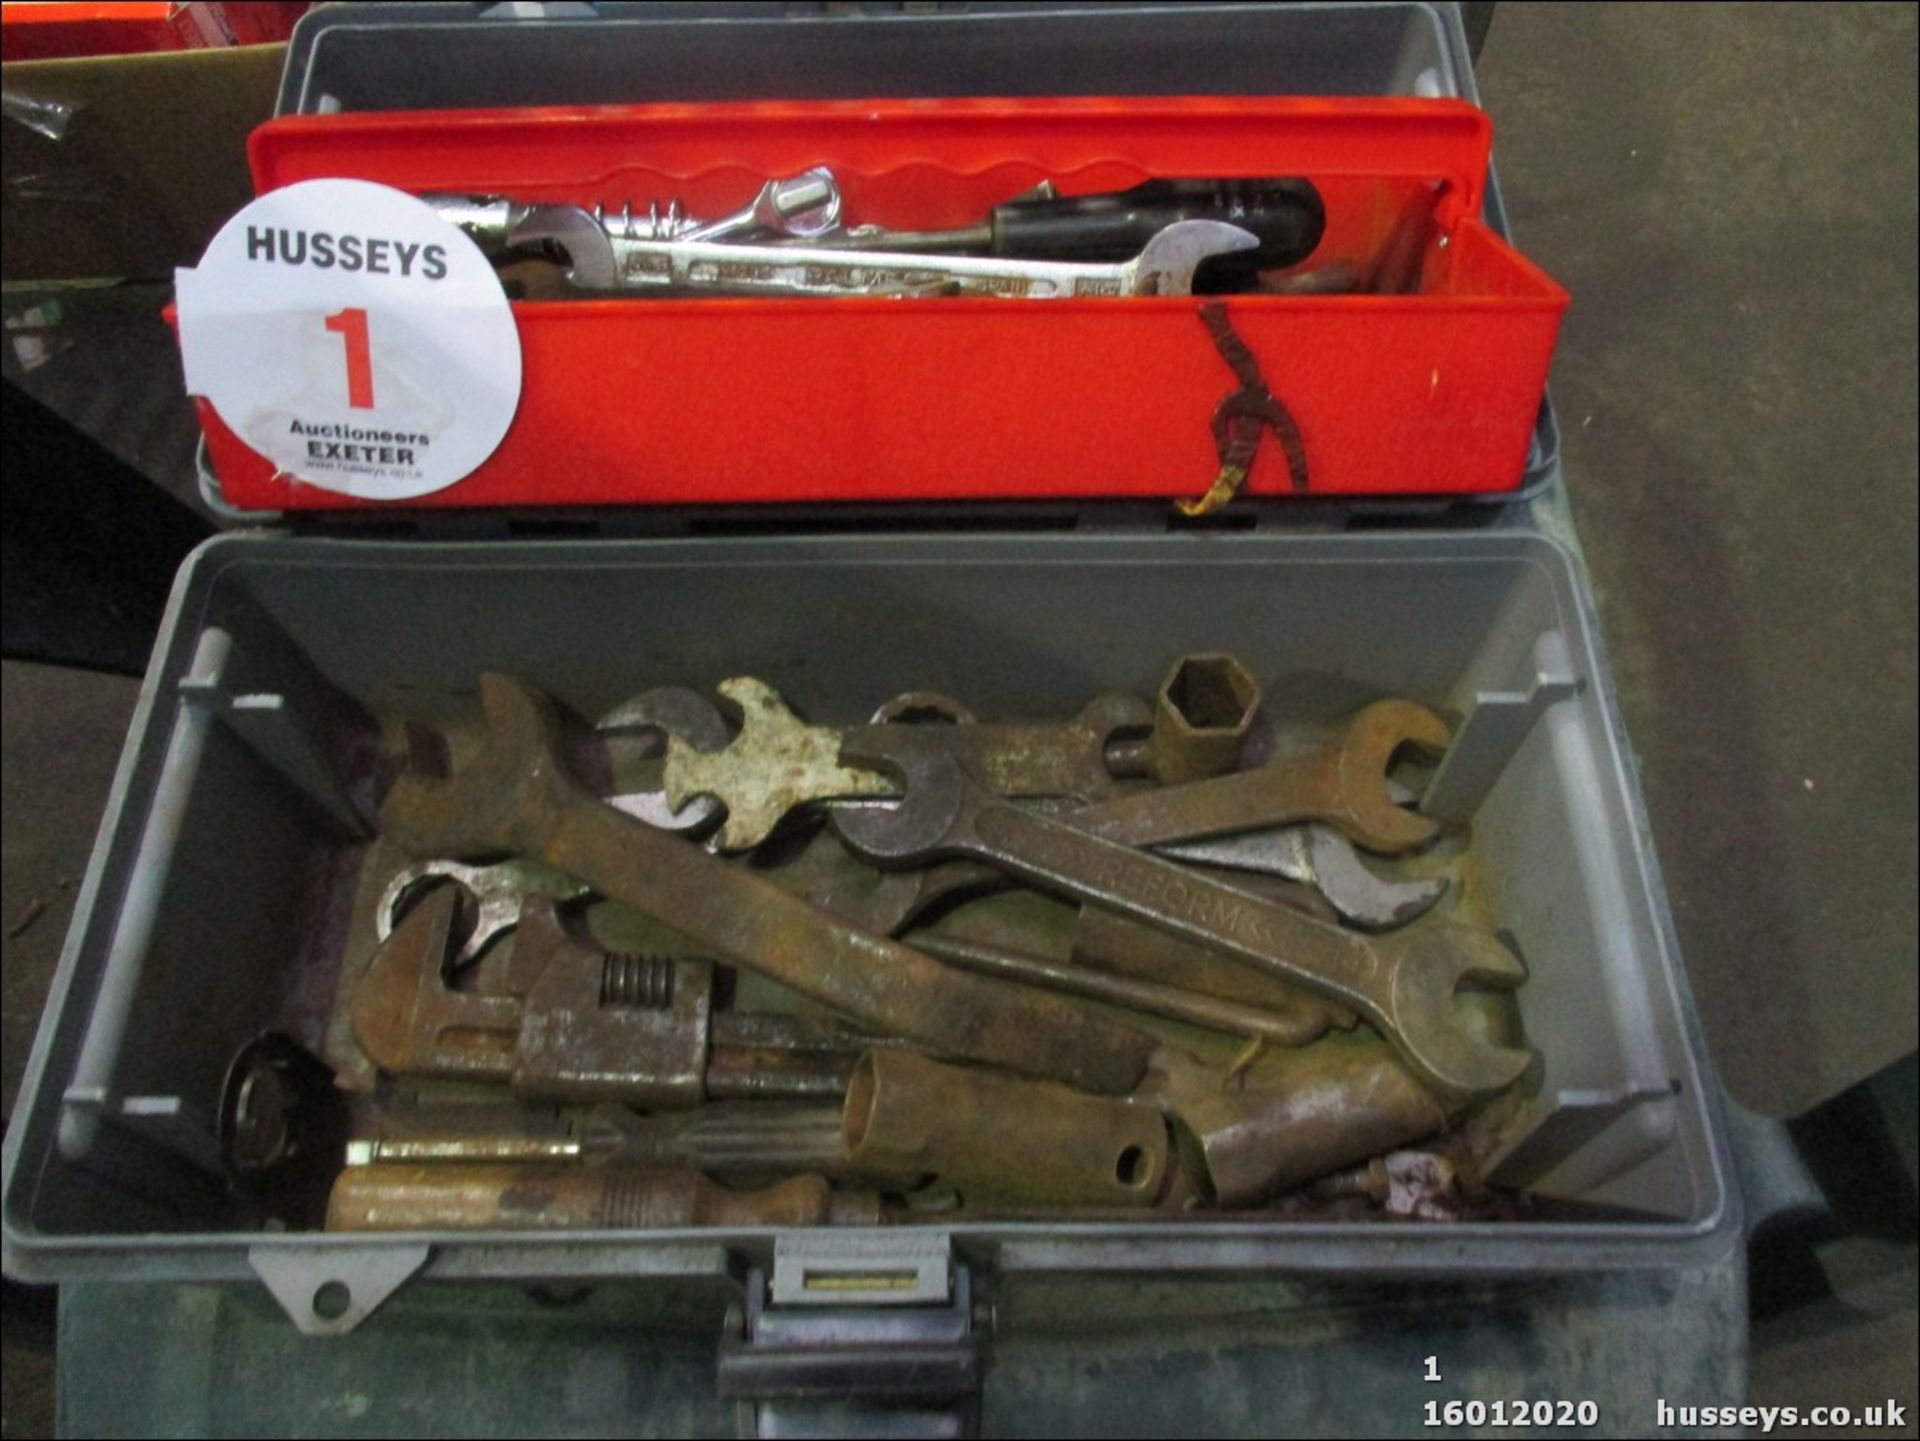 TOOLBOX AND TOOLS